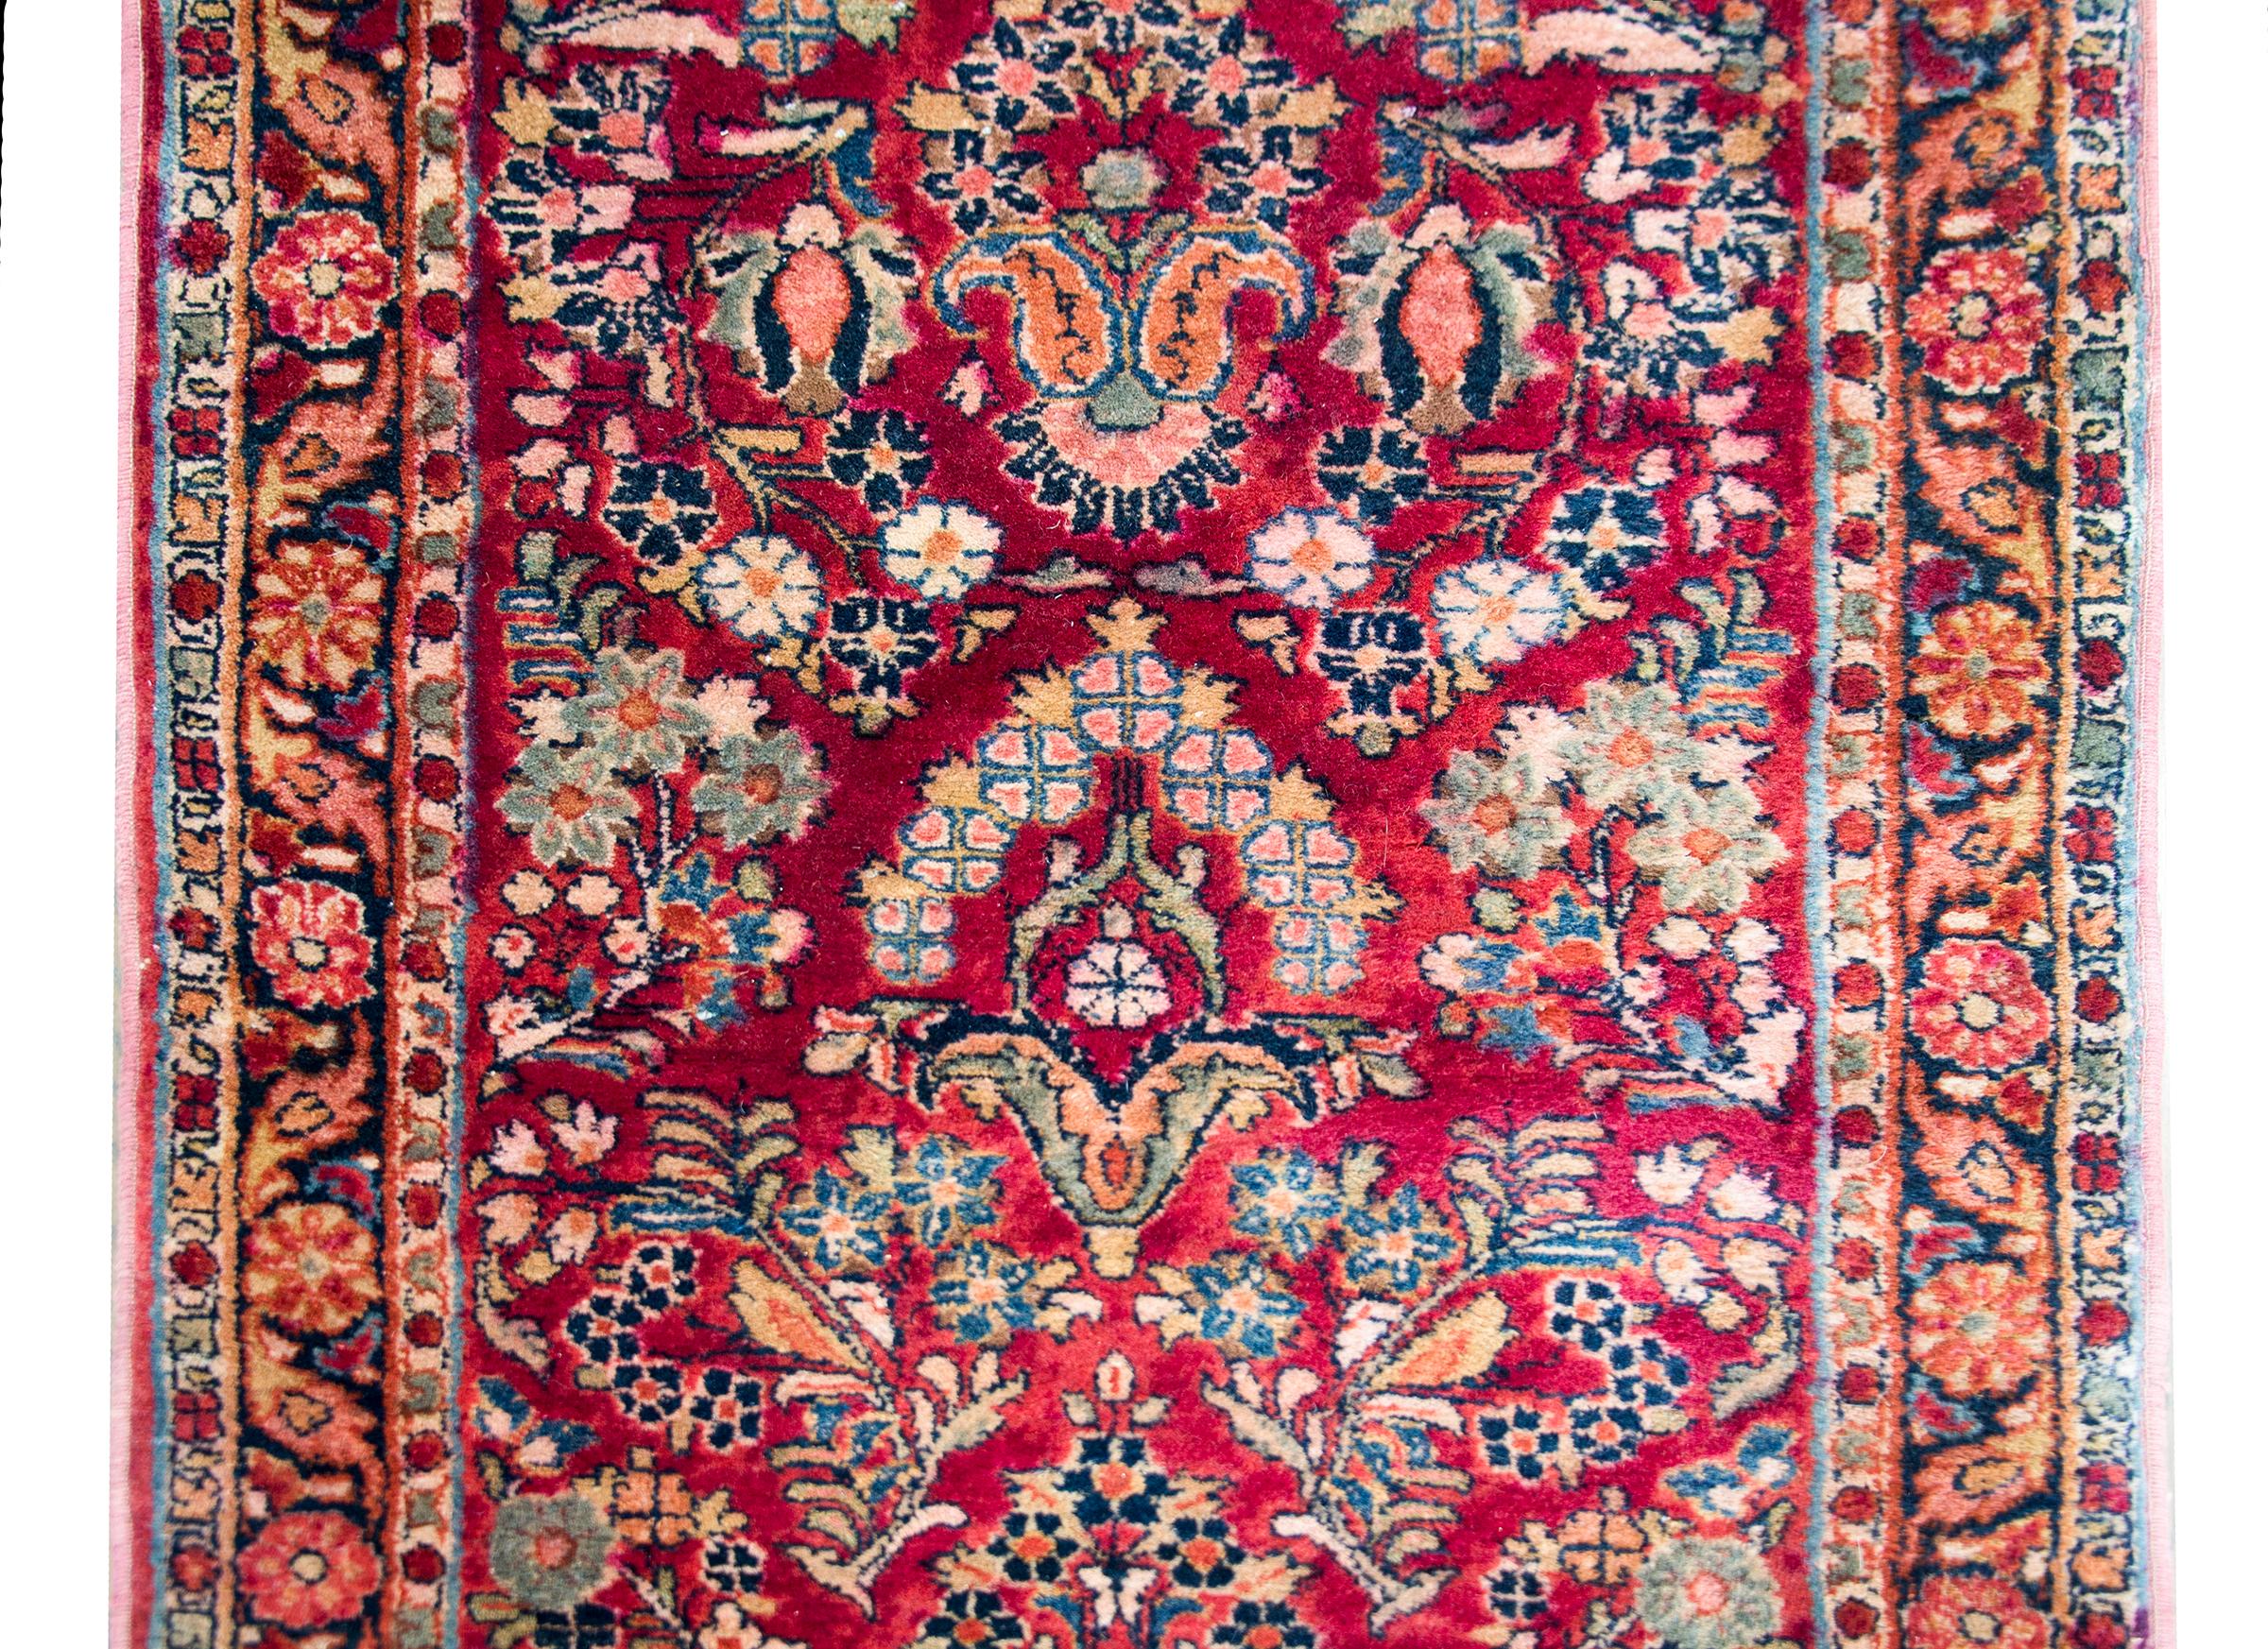 A wonderful early 20th century Persian Sarouk runner with an all-over mirrored floral pattern woven in traditional Sarouk colors of cranberry, pink, light and dark indigo, and cream, and all surrounded by a border with multiple large and small scale